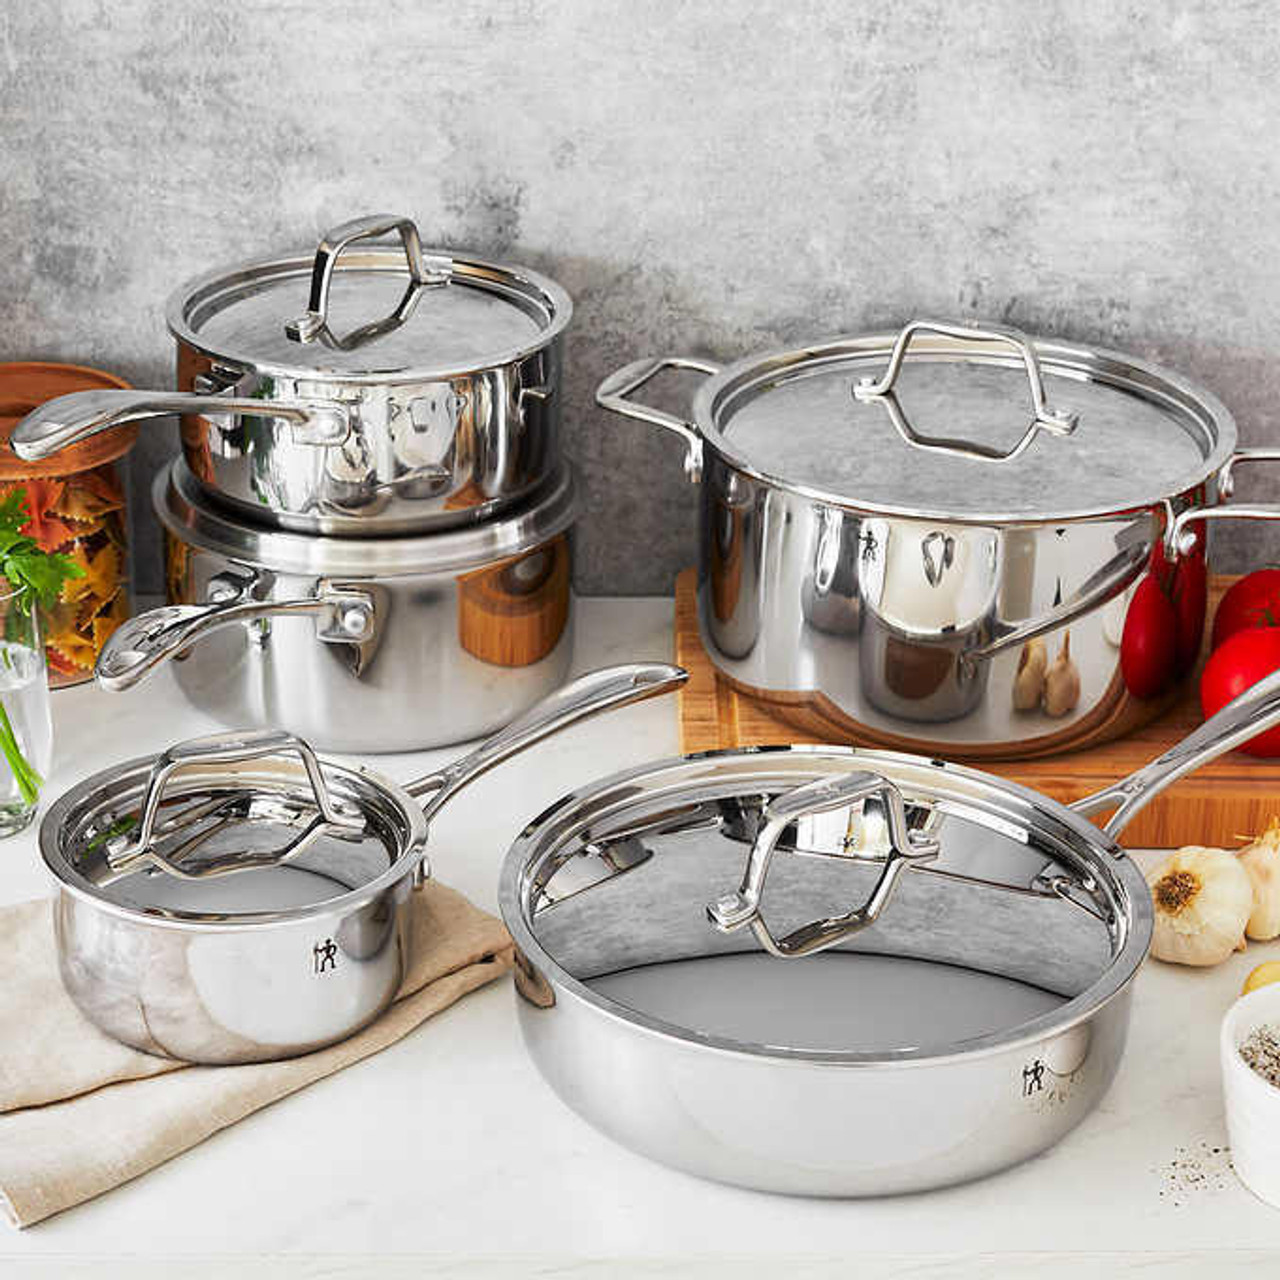 HENCKELS RealClad 5-ply Stainless Steel and Aluminum Clad Cookware